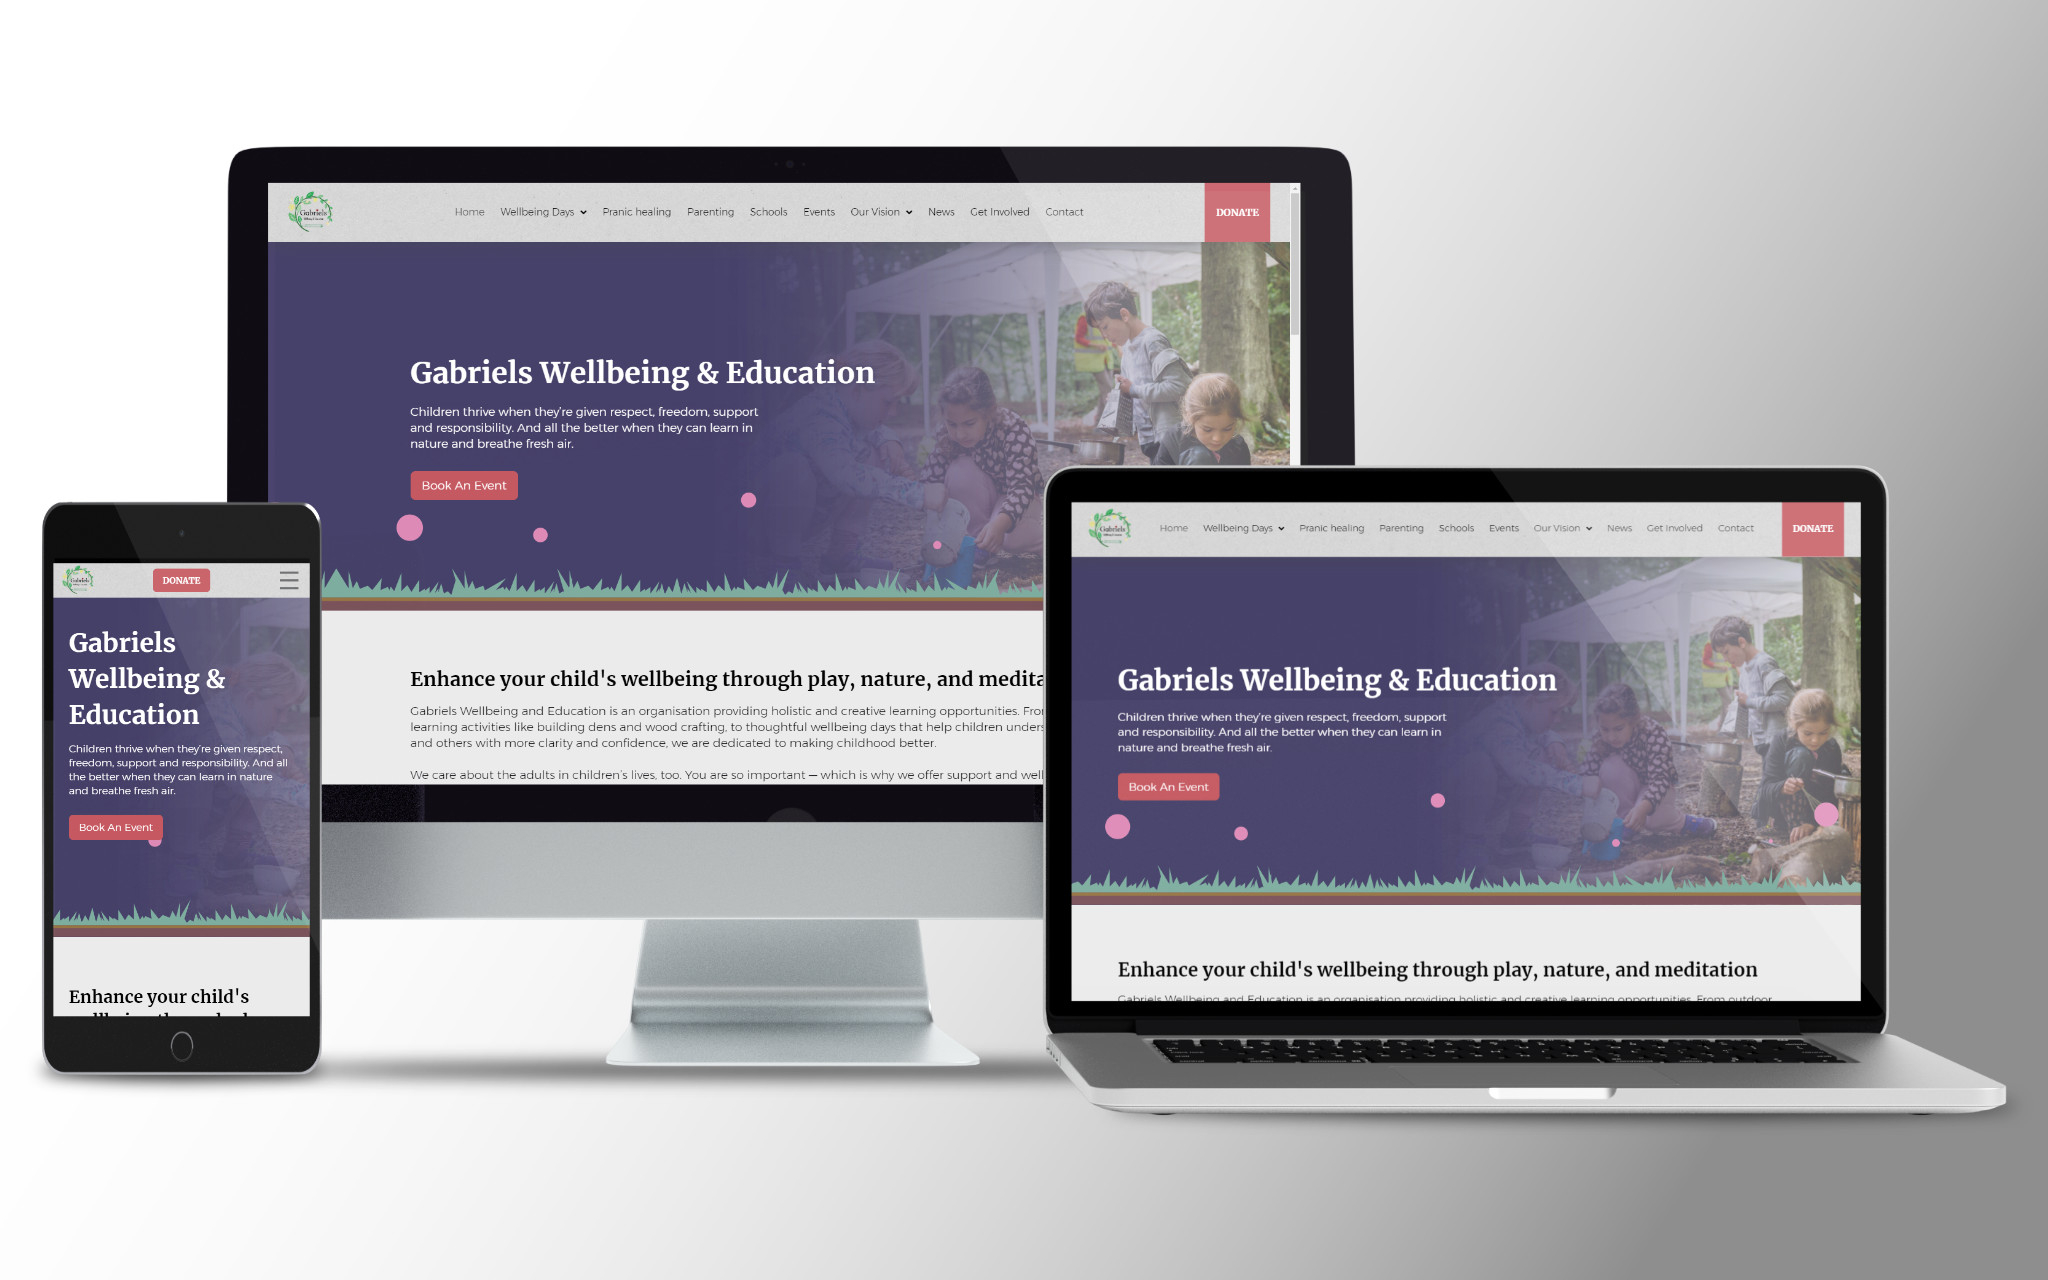 Web Design Increases Event Bookings By 329% For Gabriels Education 28